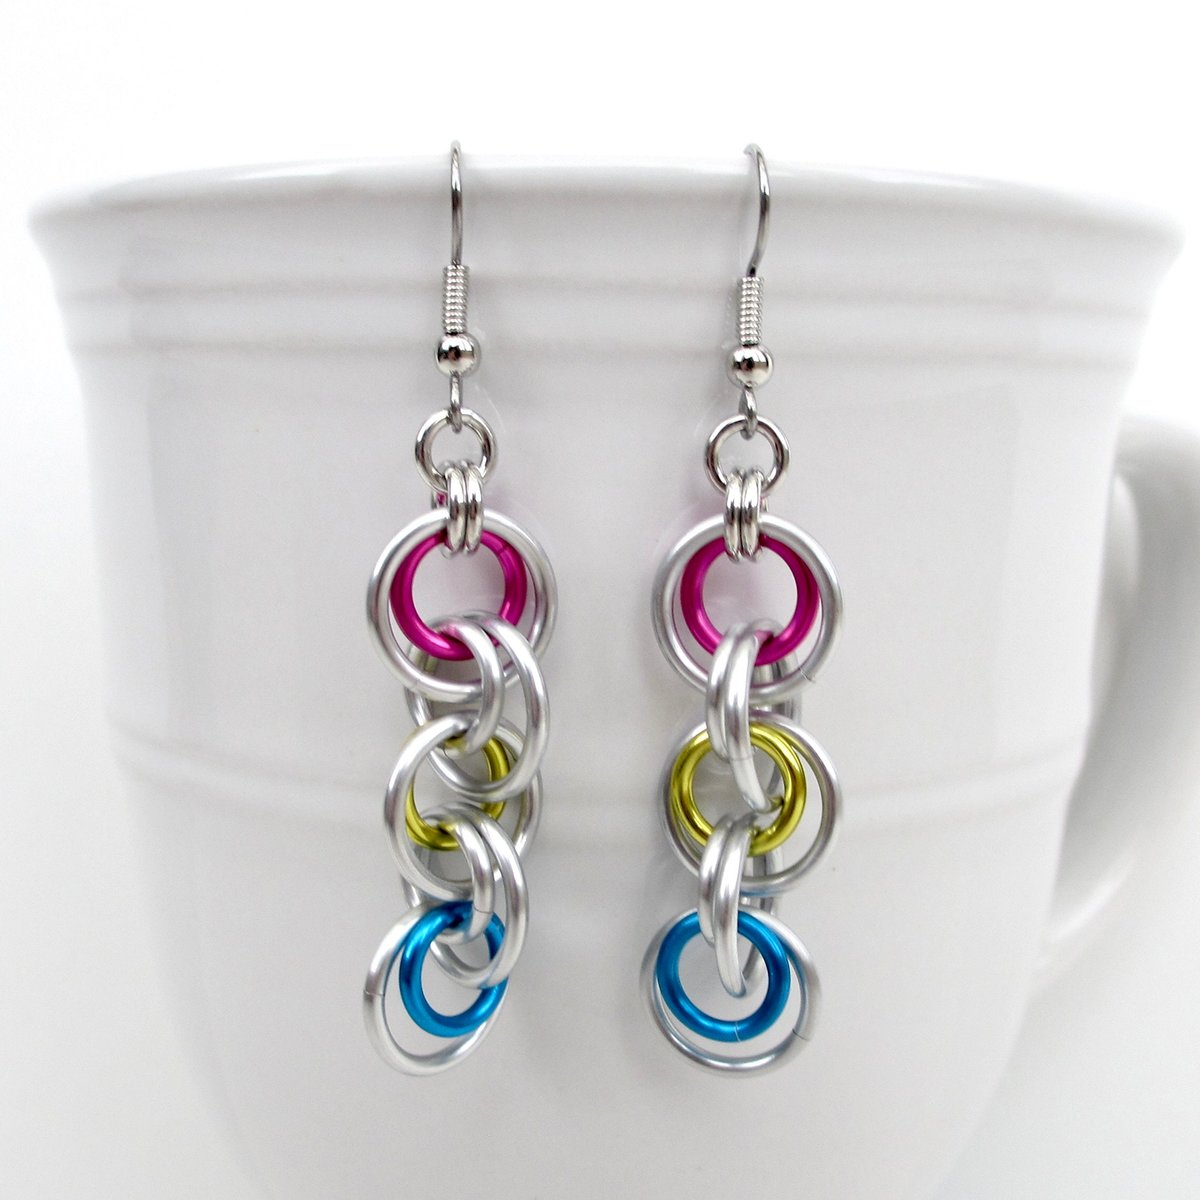 Pansexual pride jewelry, long chainmail LGBTQ earrings, pink yellow blue